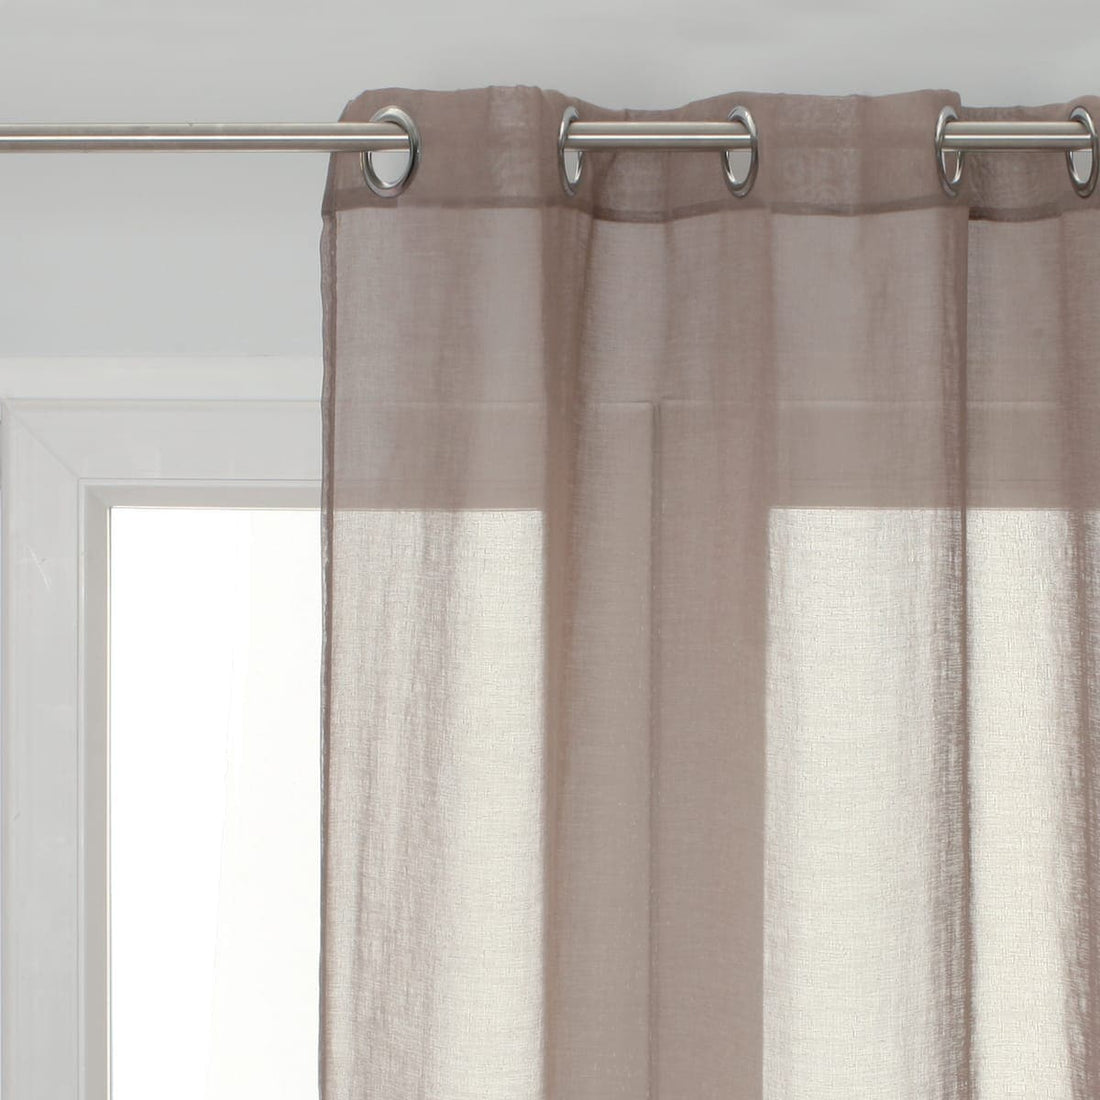 SHALI DOVE GREY FILTER CURTAIN 140X280 CM WITH EYELETS - best price from Maltashopper.com BR480007453